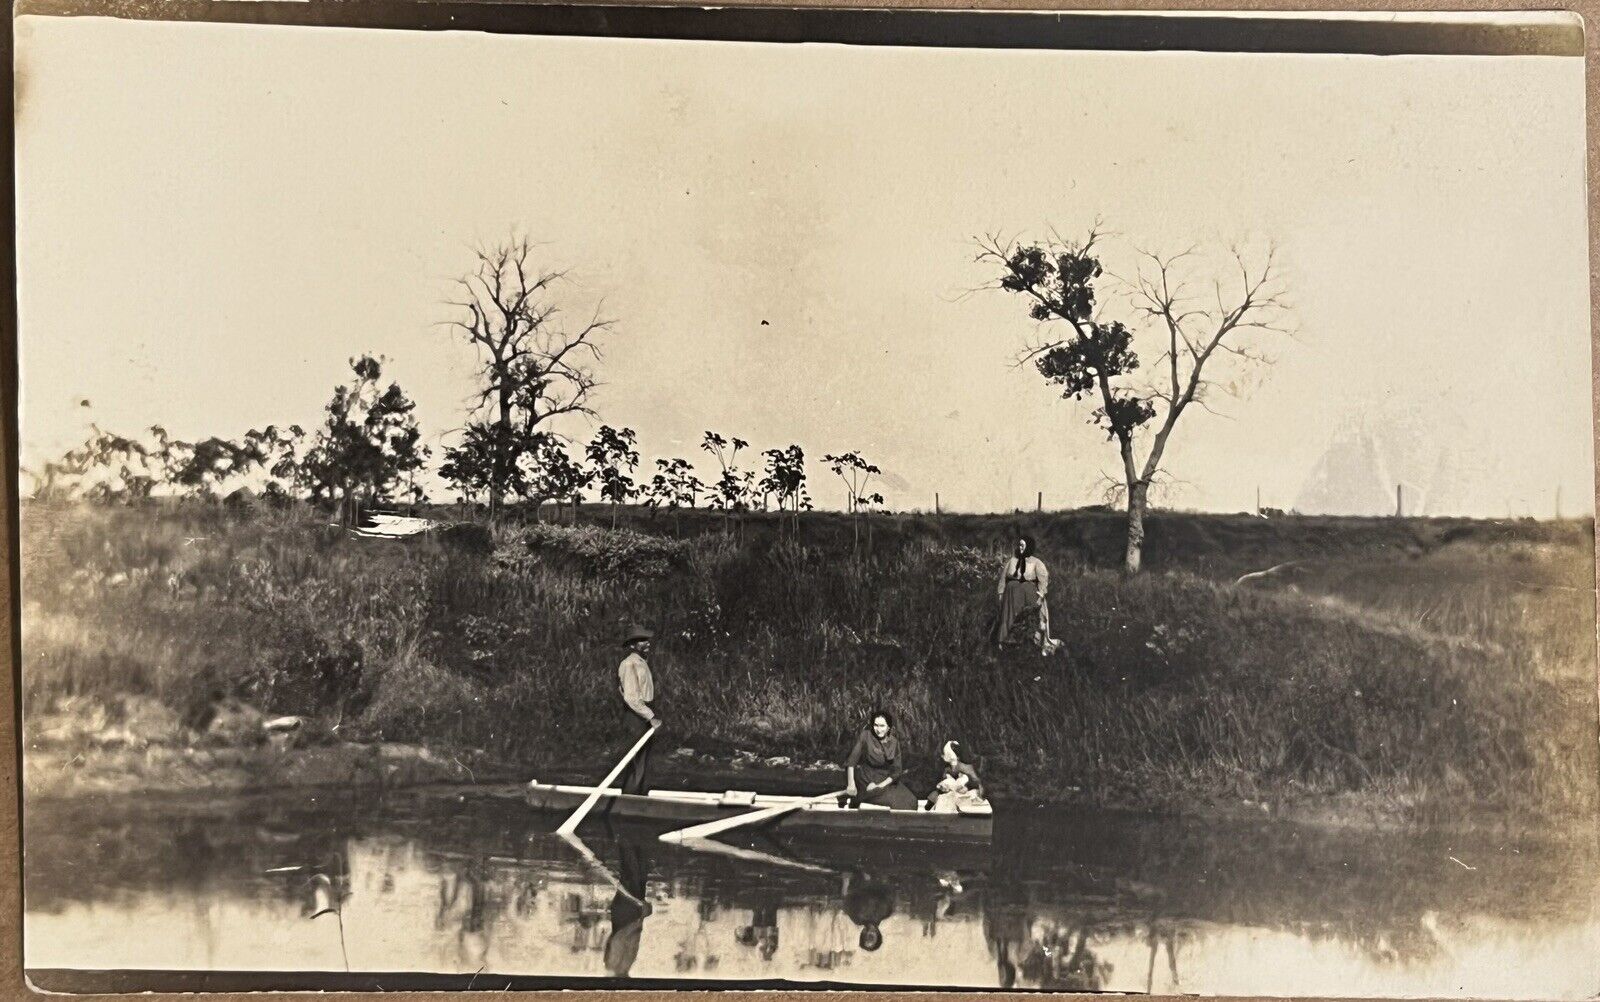 RPPC People in Canoe at River Bank Antique Real Photo Postcard c1910